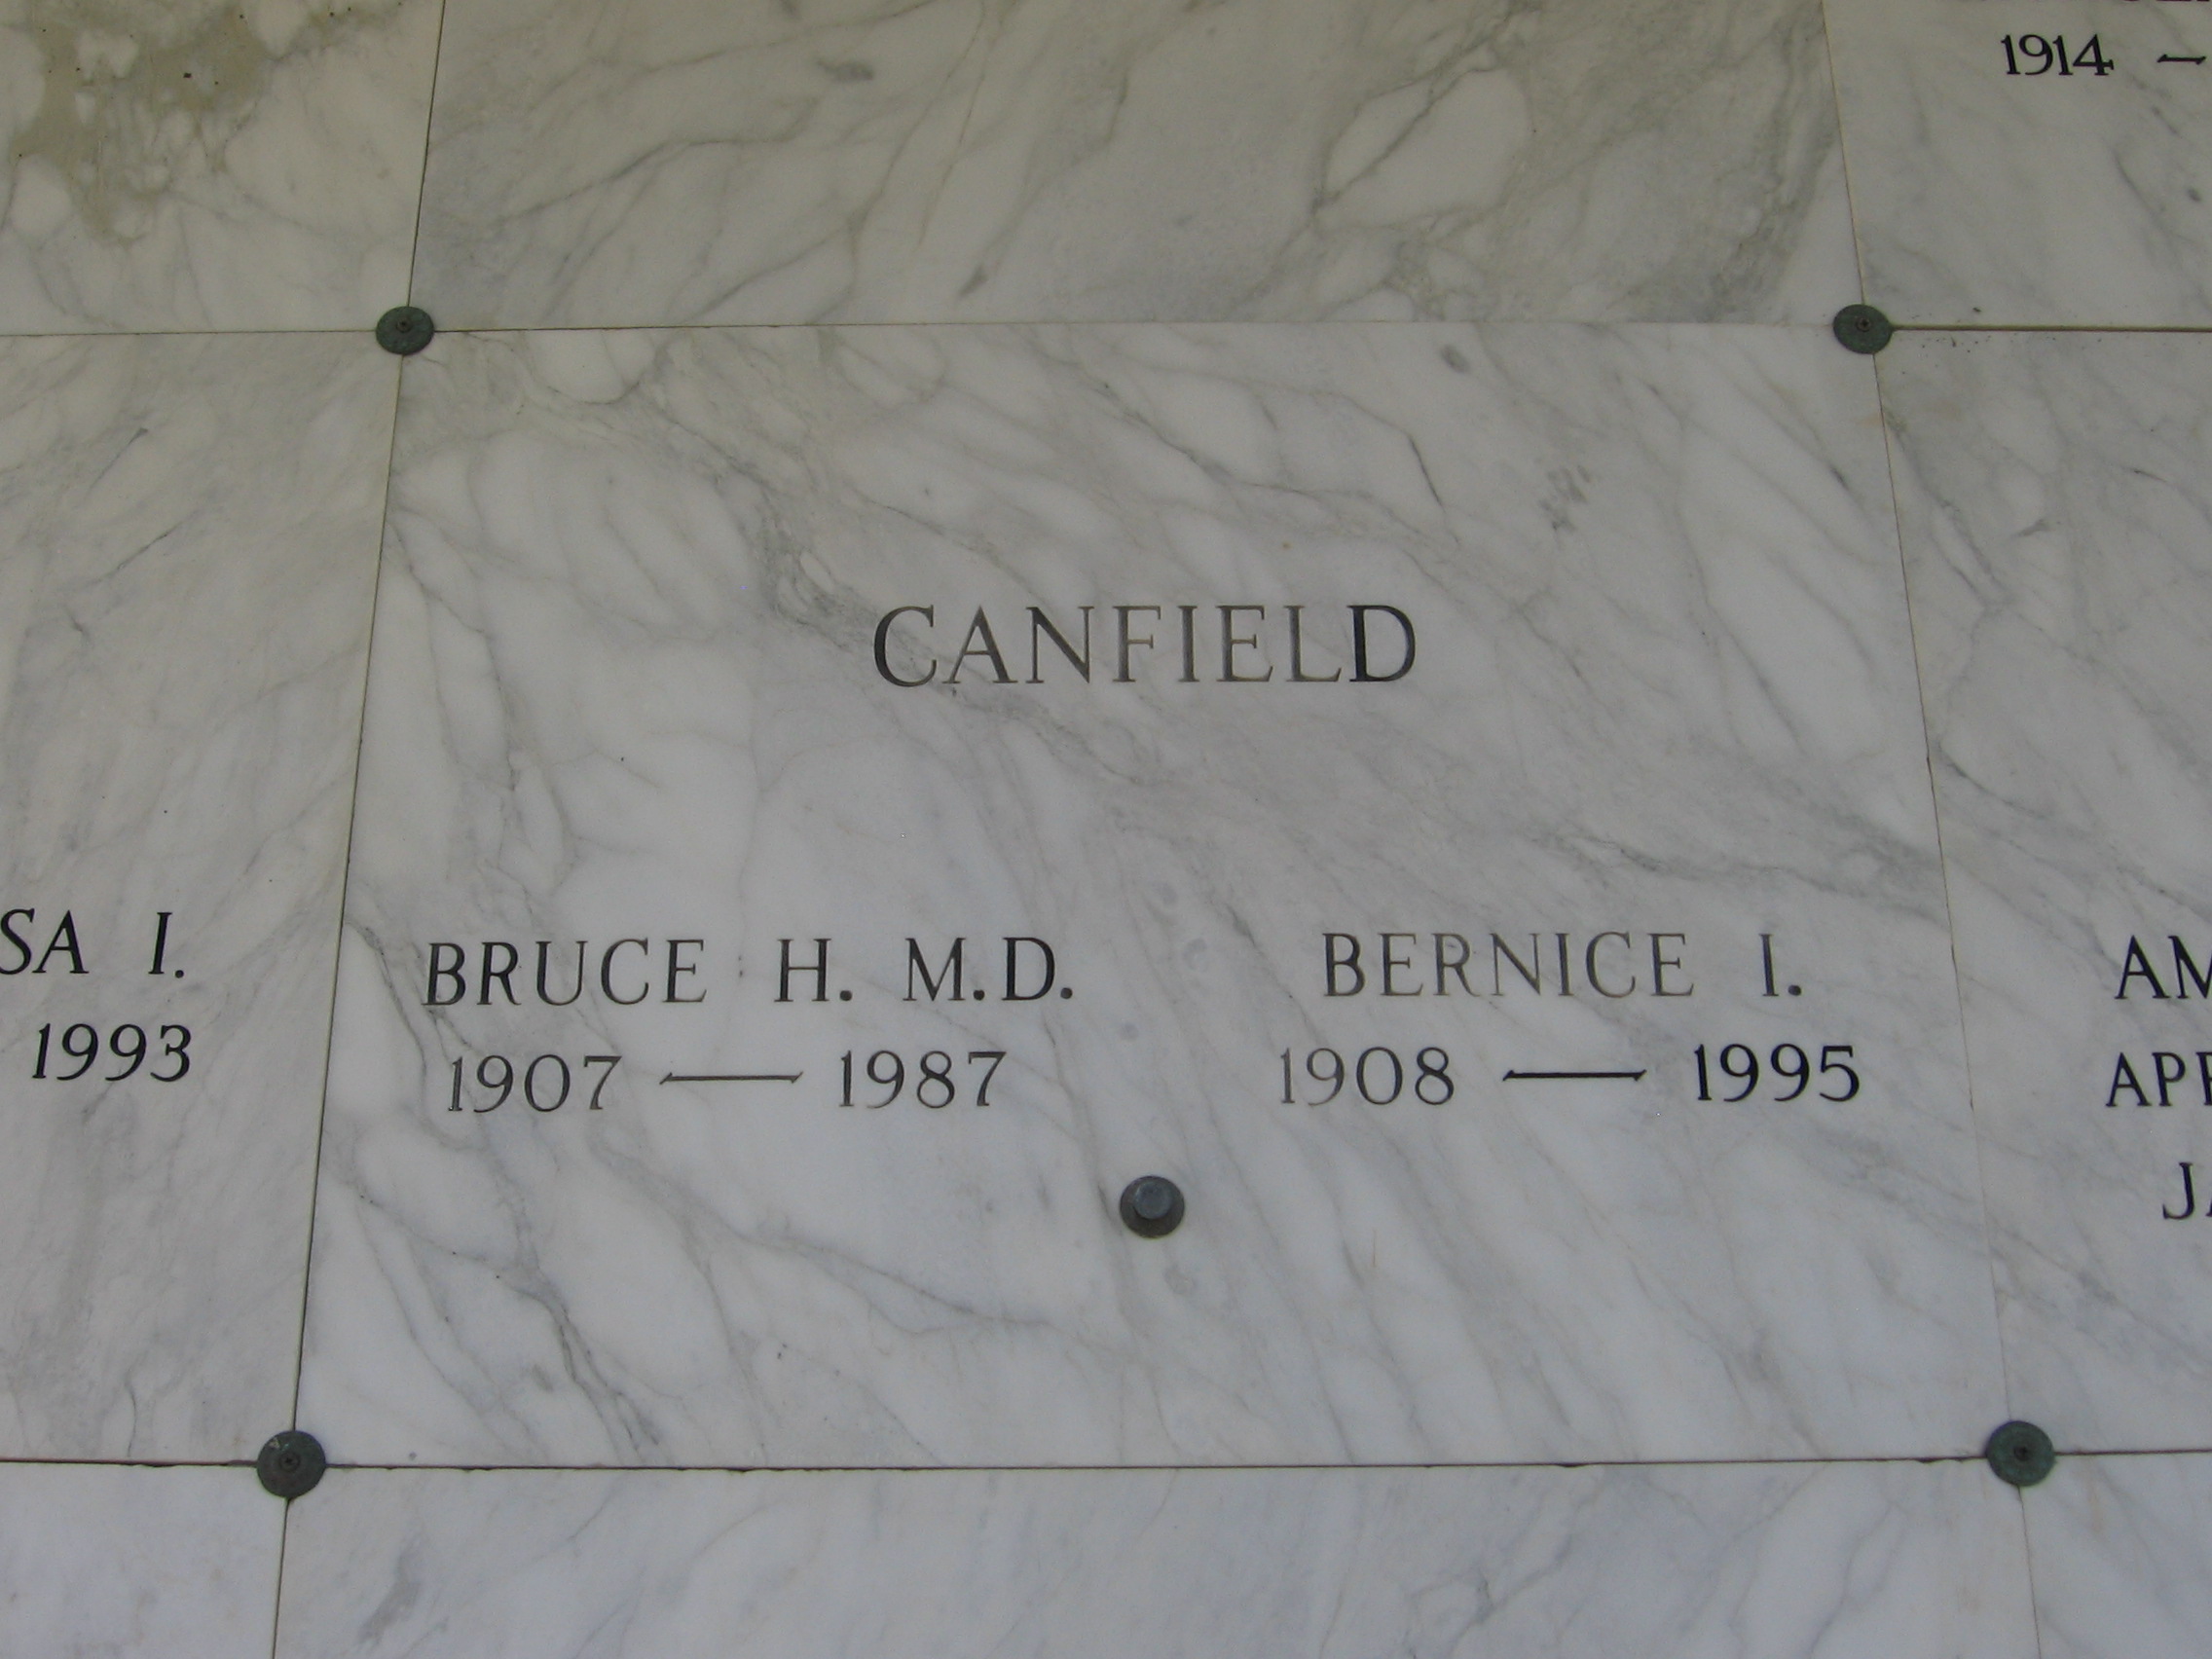 Dr Bruce H Canfield